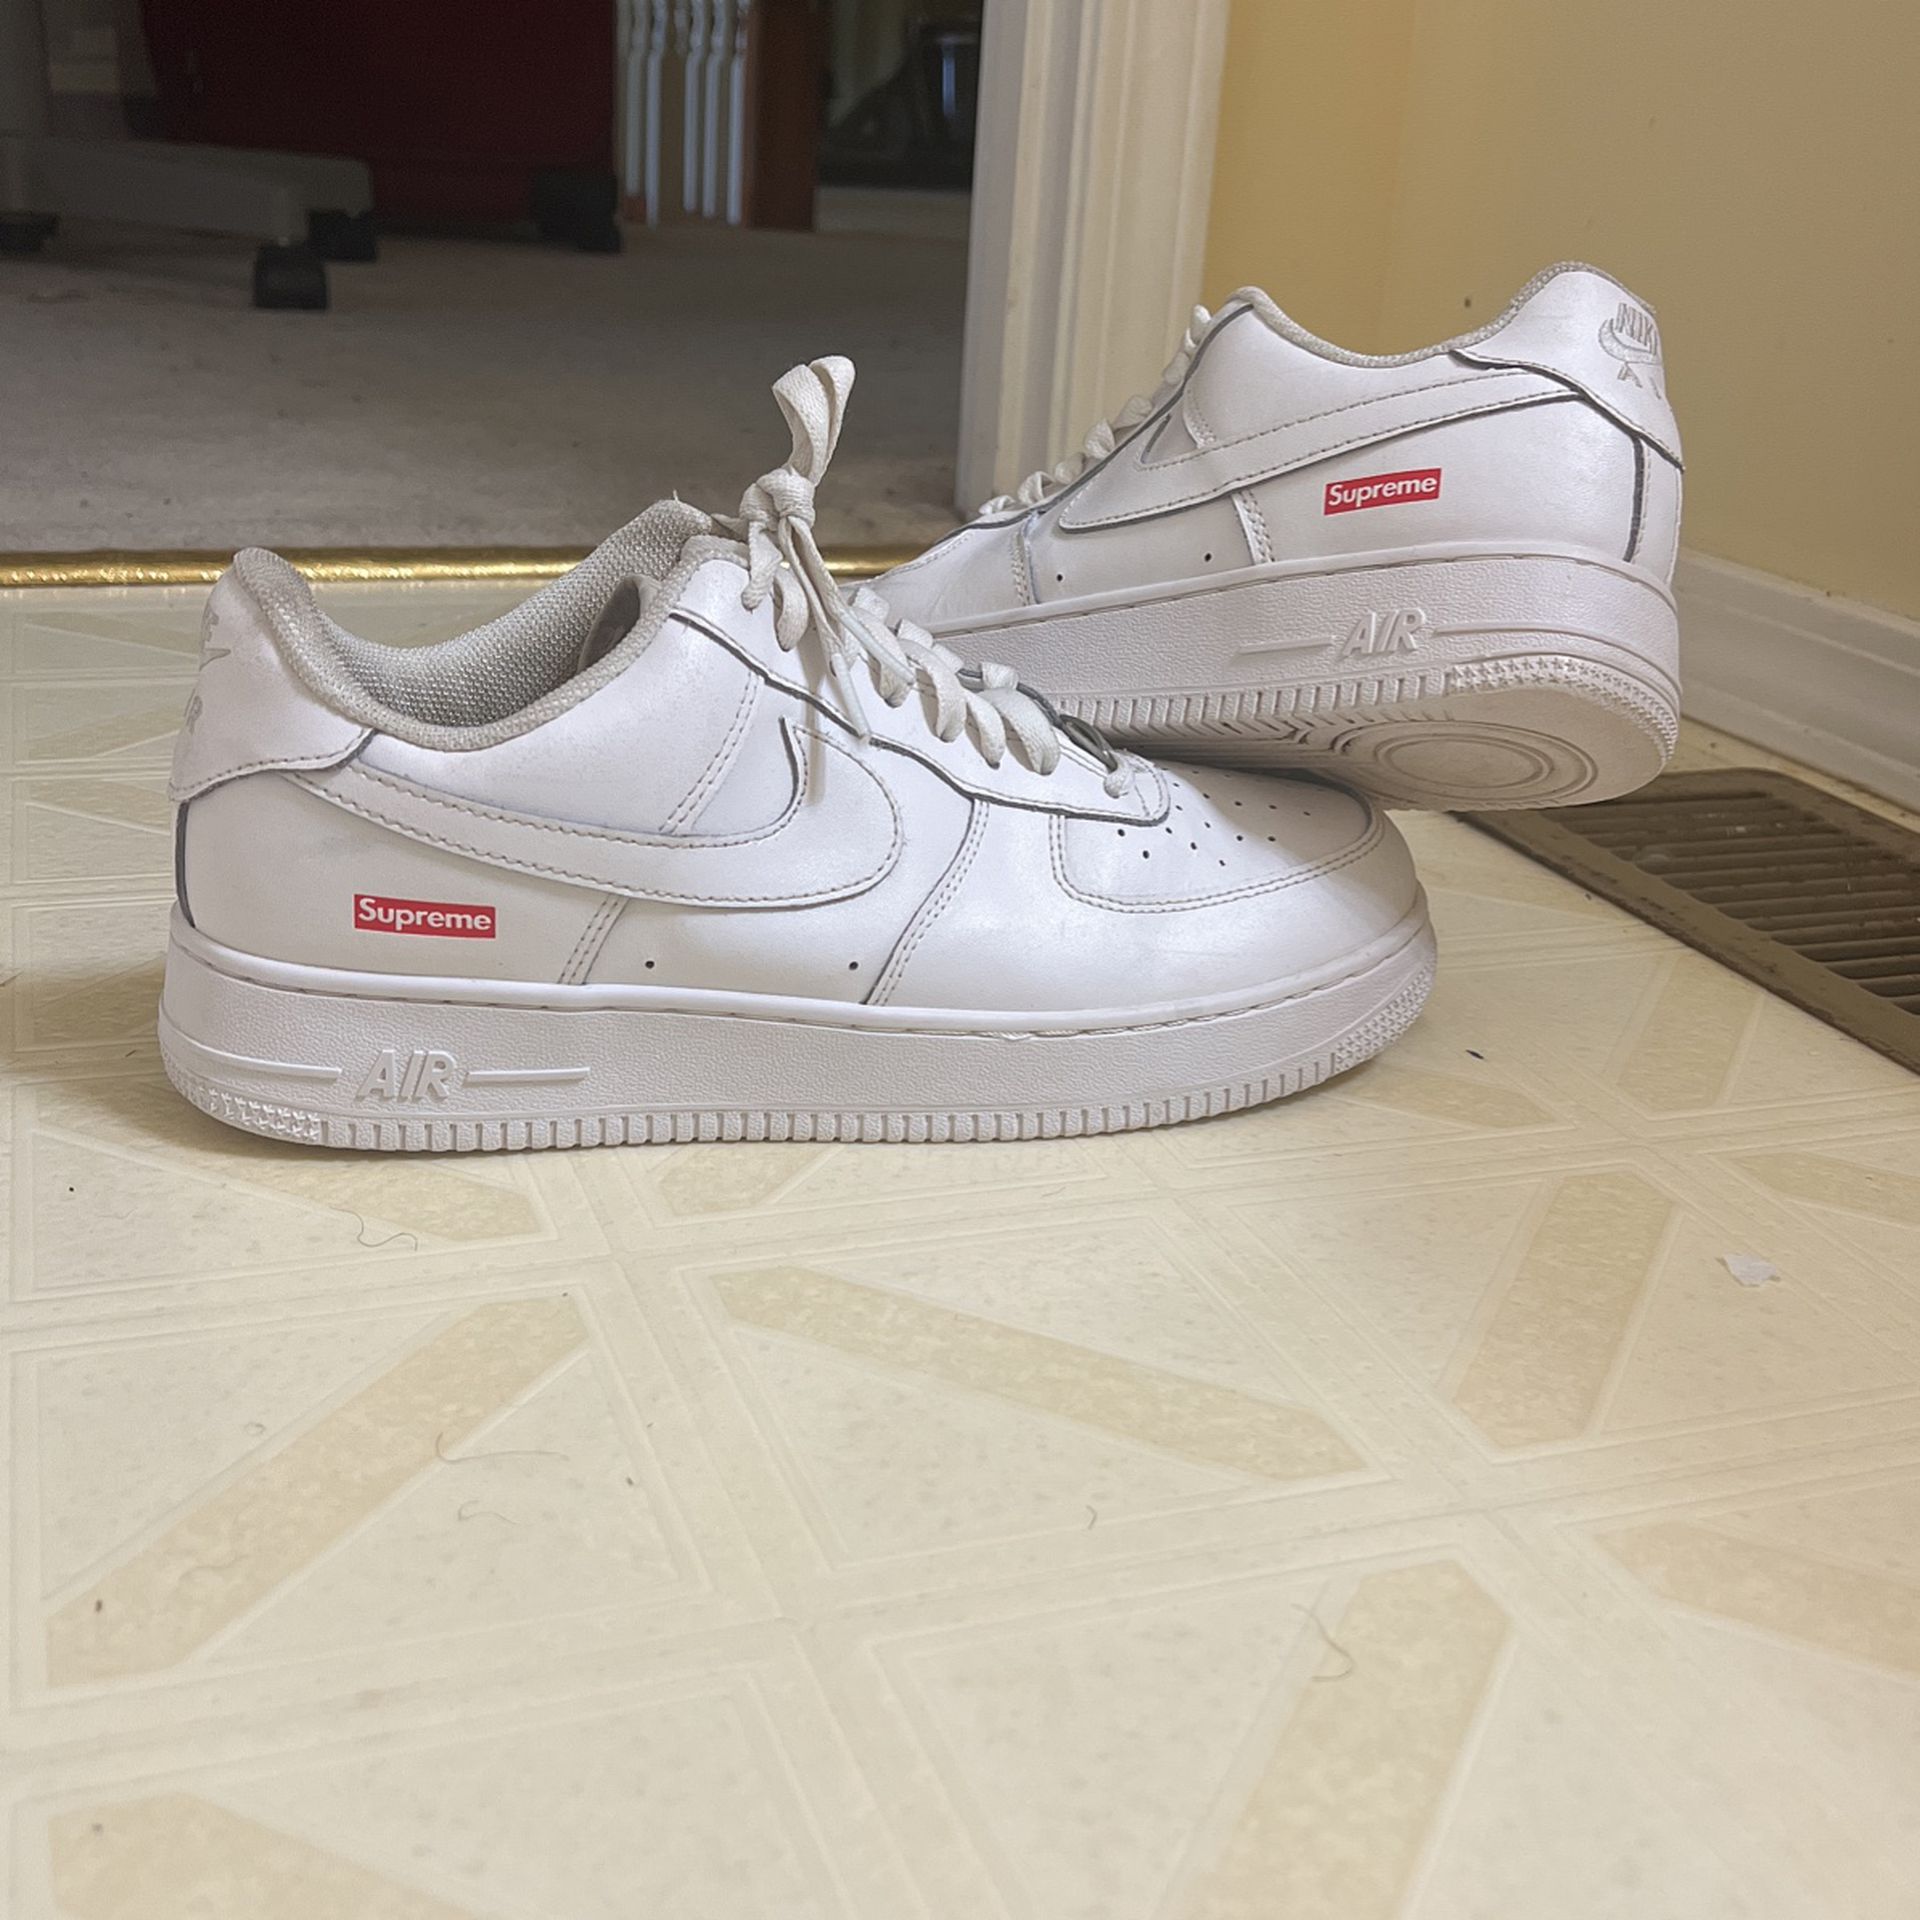 Supreme Air Force 1s Size 9